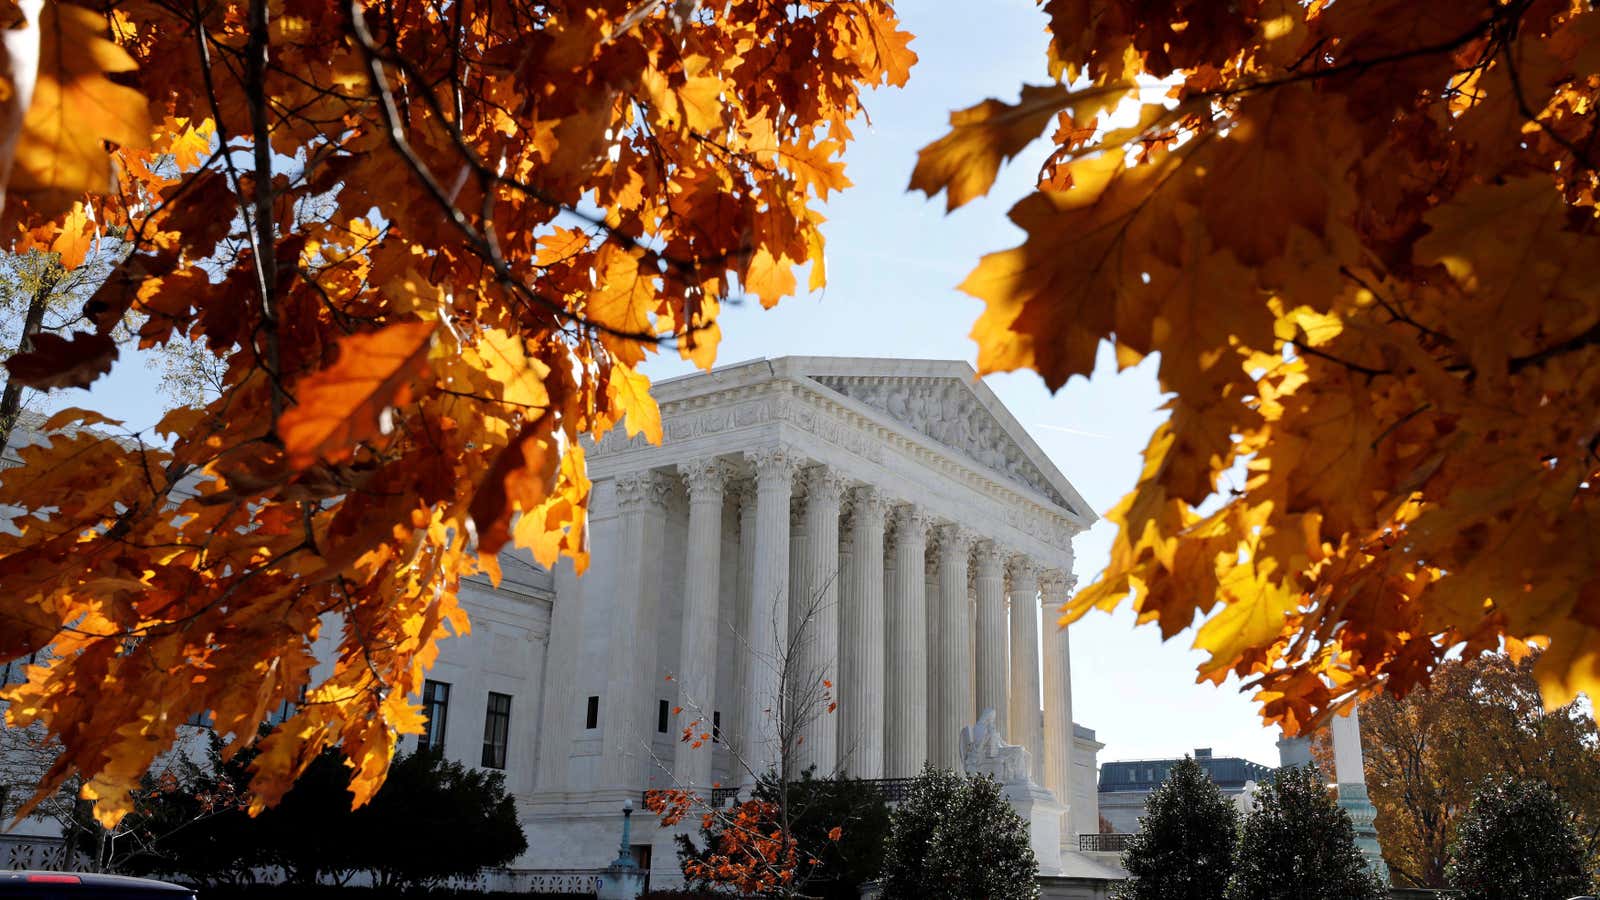 As the leaves fall, the high court mulls privacy in a time of change.